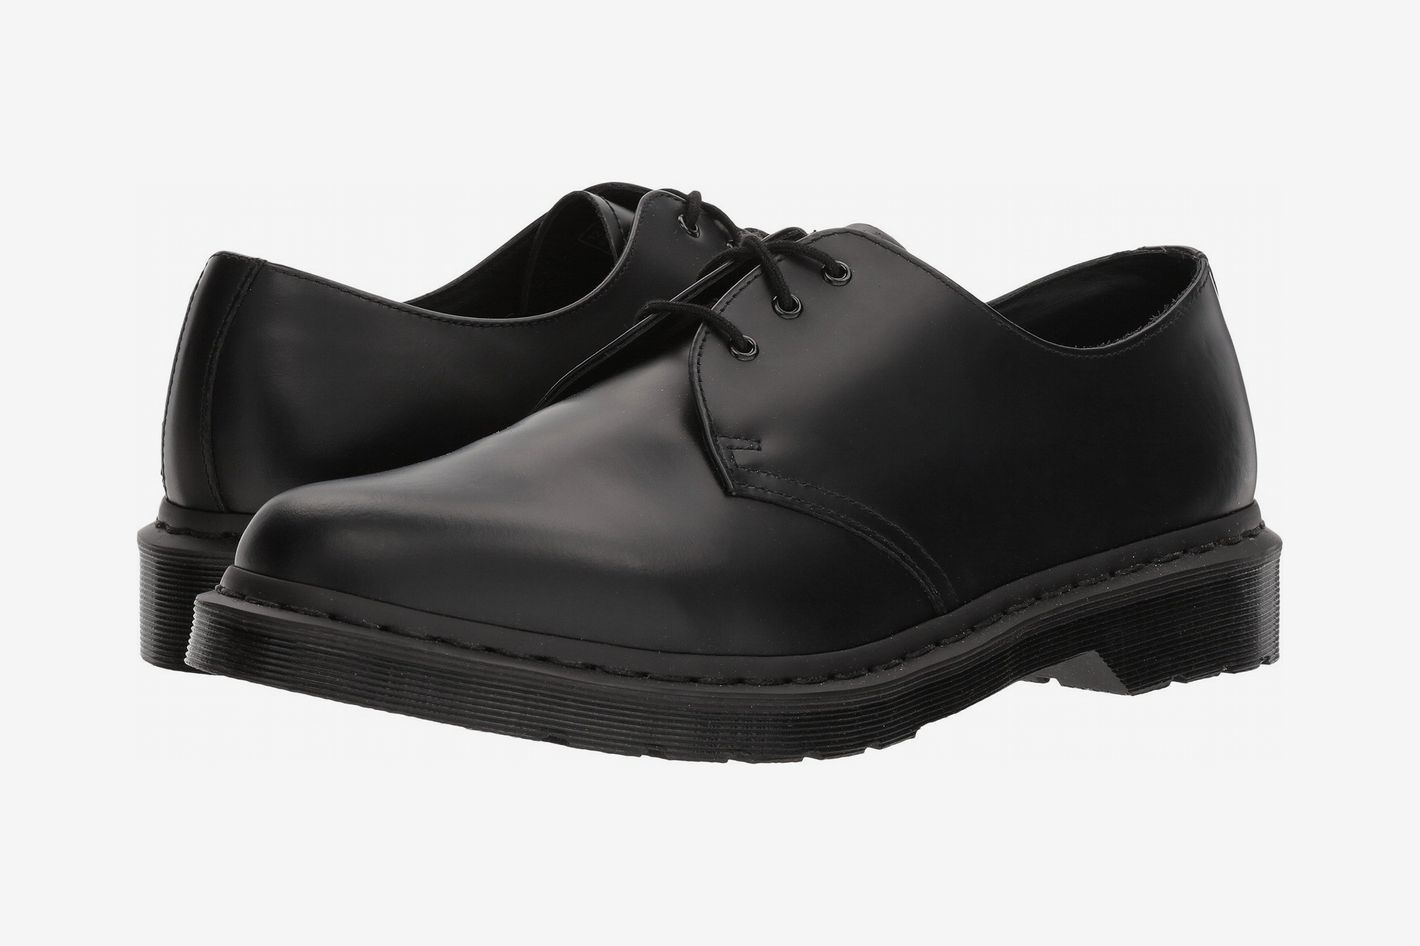 Dr. Martens Mono 1461 Shoes Review - 2019 | The Strategist